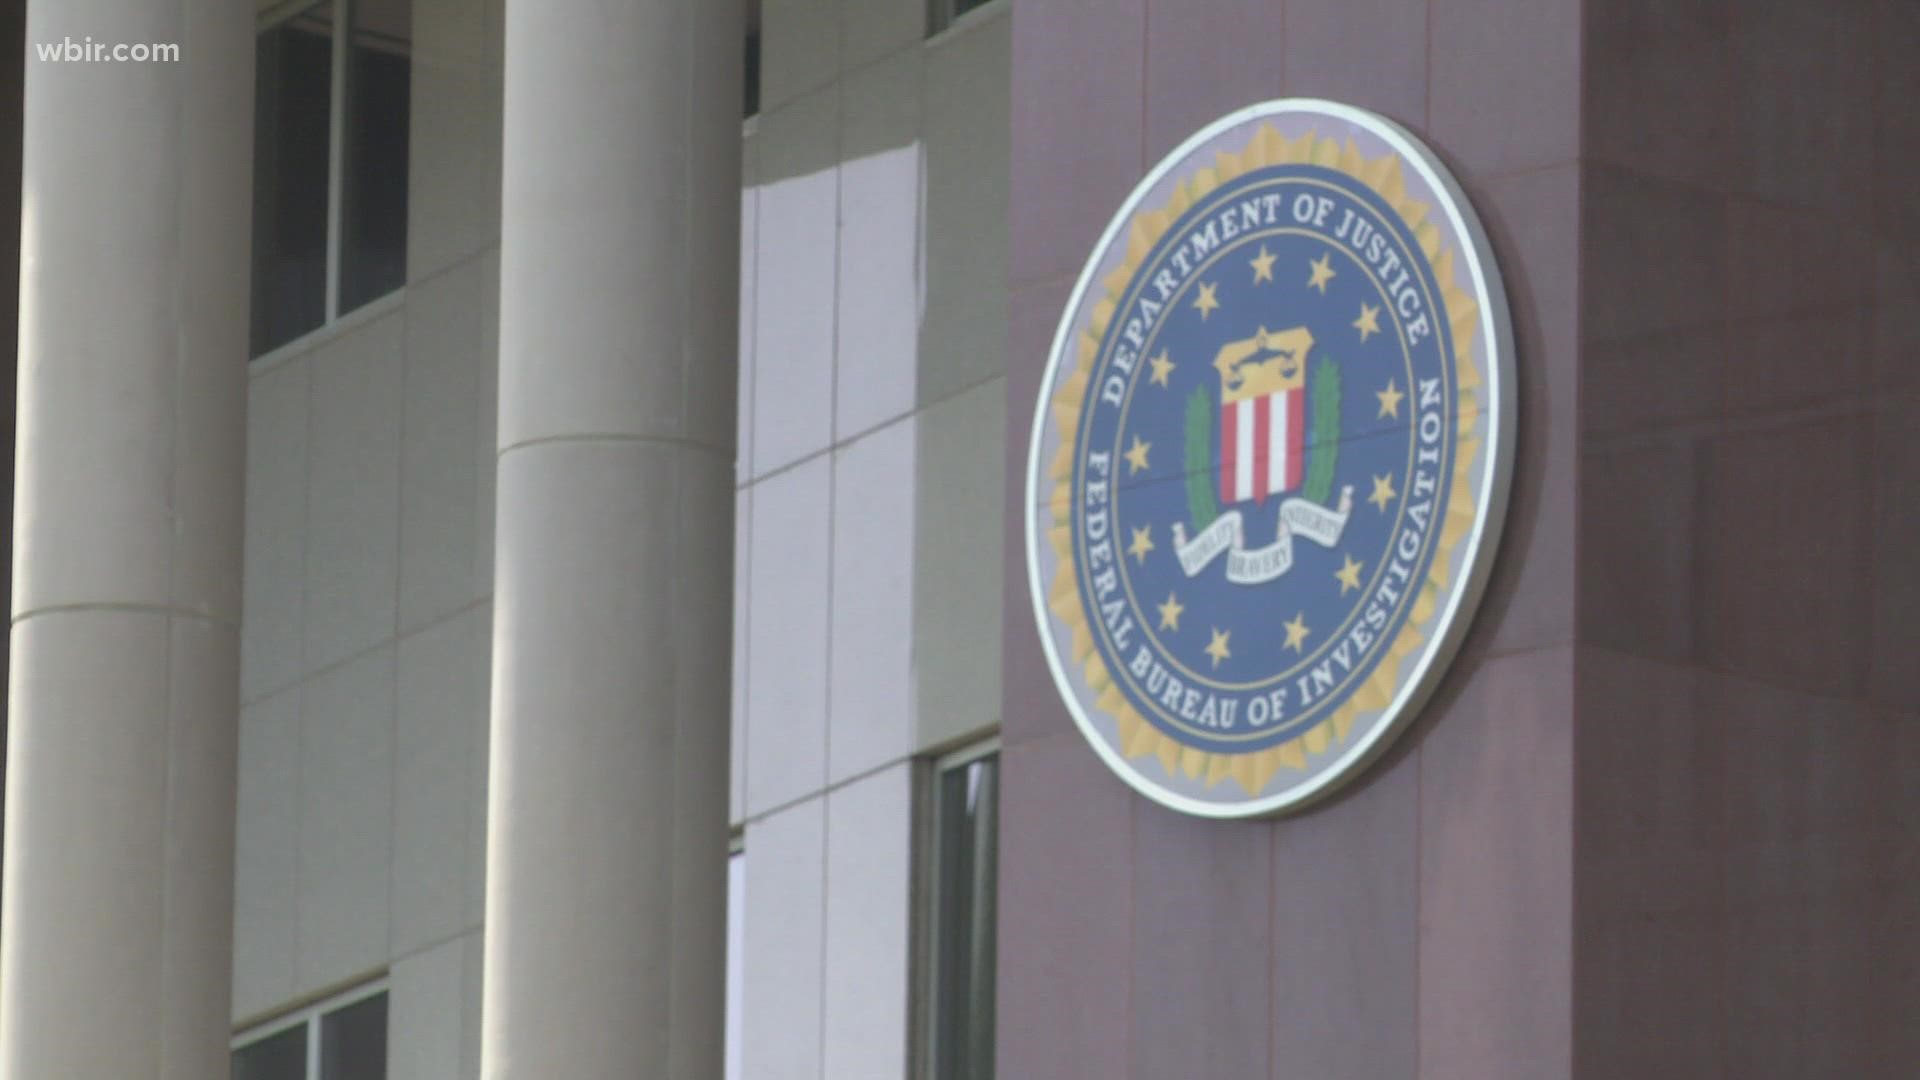 The agency said it wants to reach people who don't traditionally think about a career in the FBI.